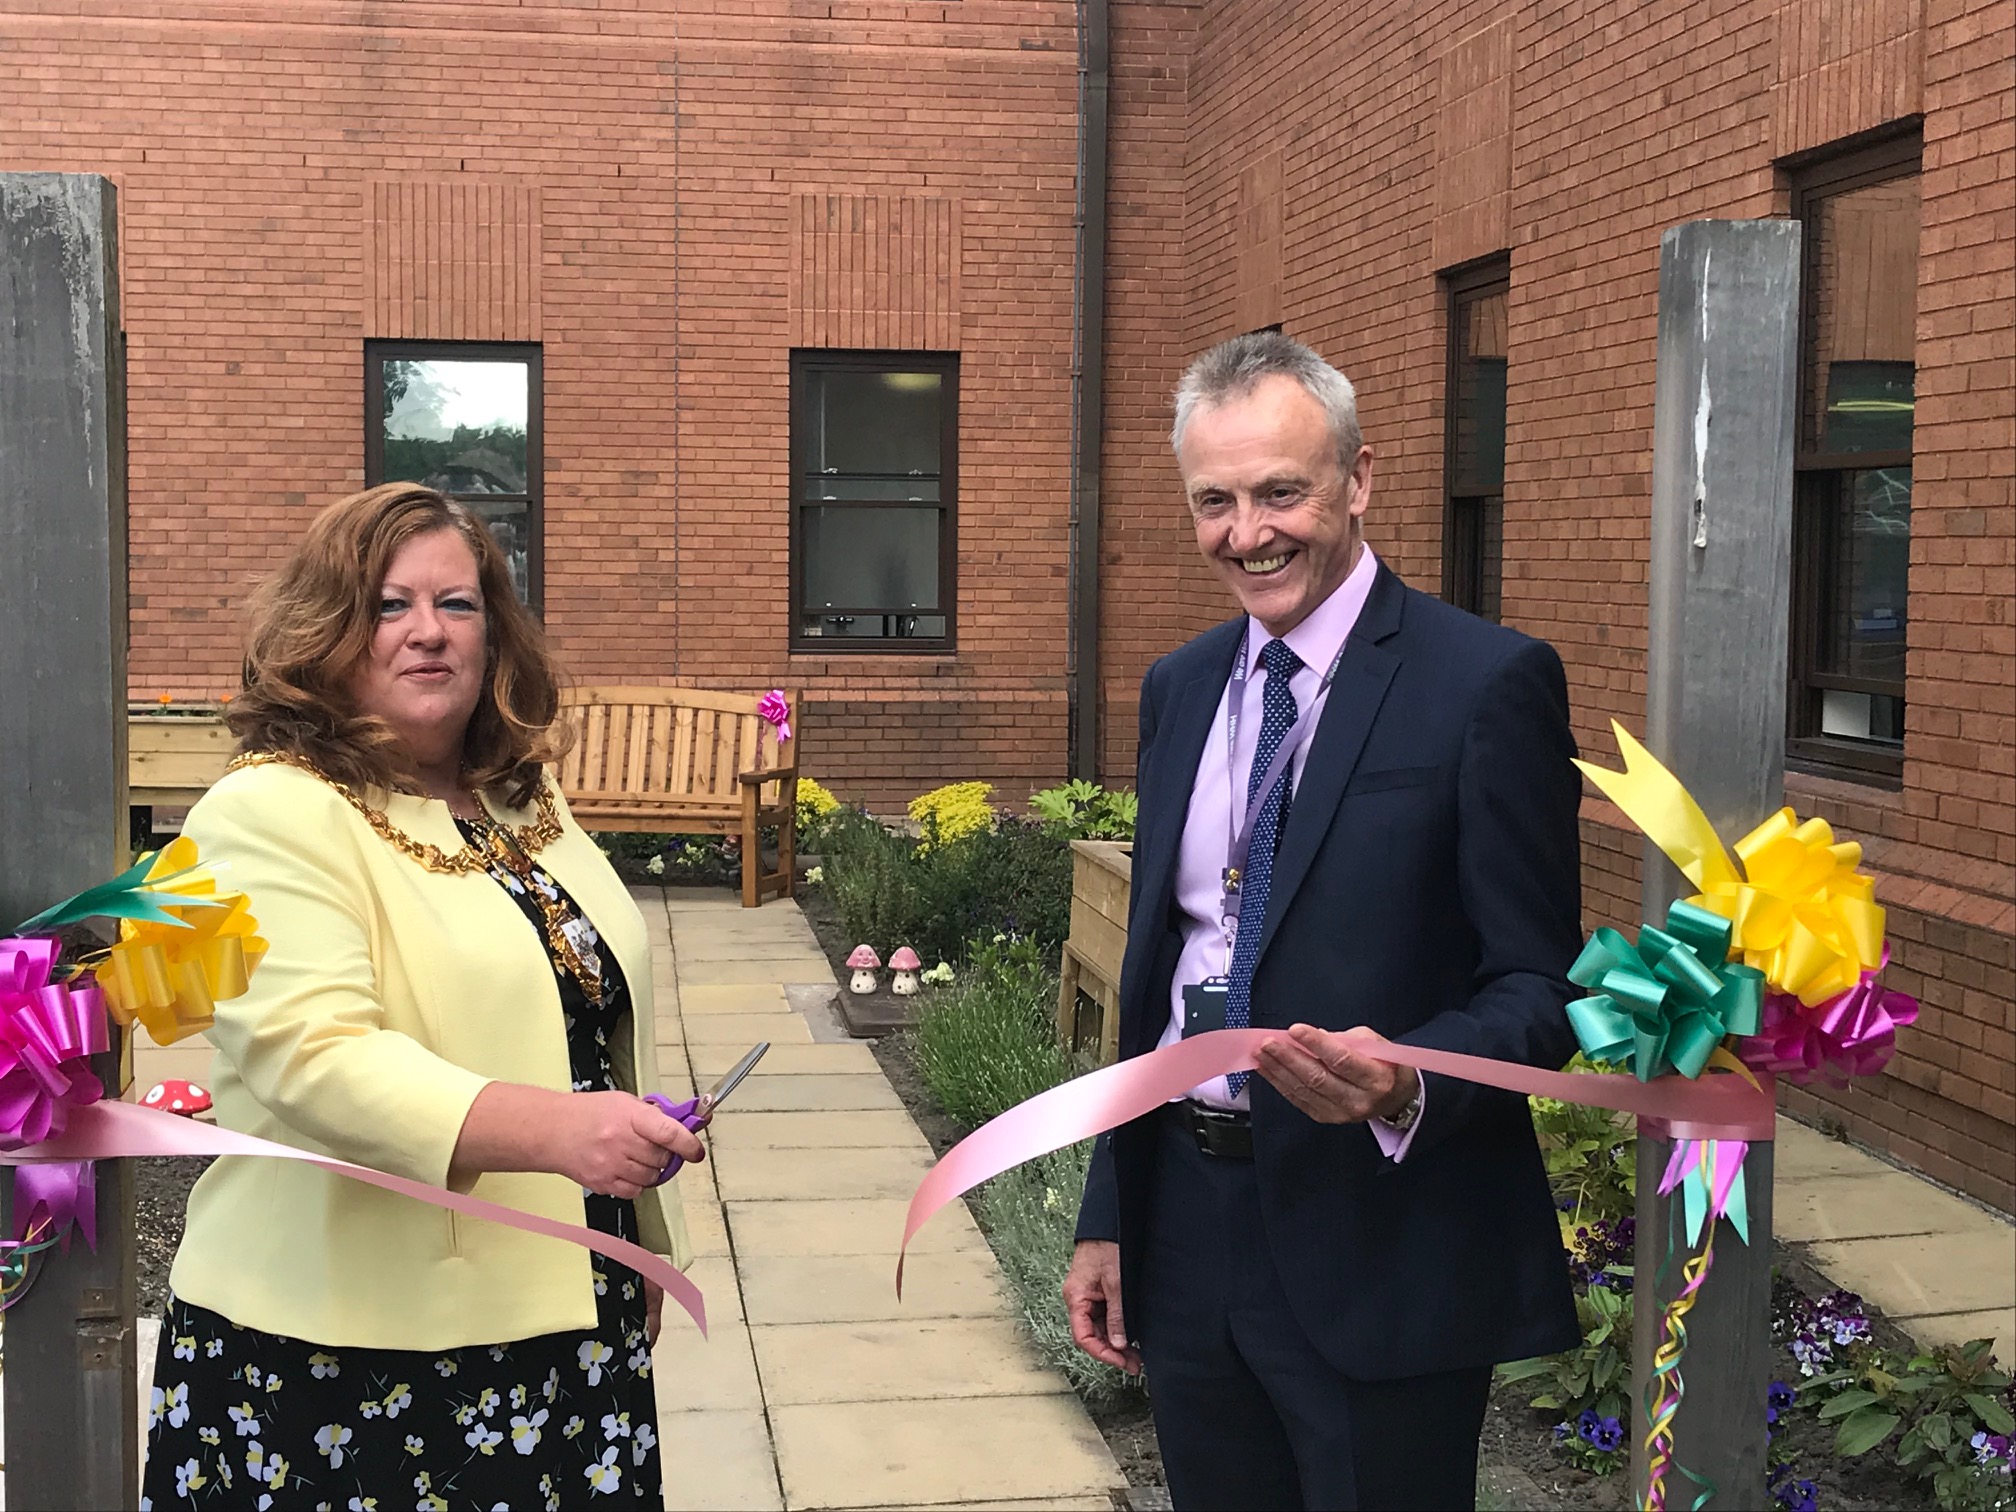 Mayor of Warrington, Cllr Wendy Johnson cutting the ribbon of the new garden with Chairman Steve McGuirk